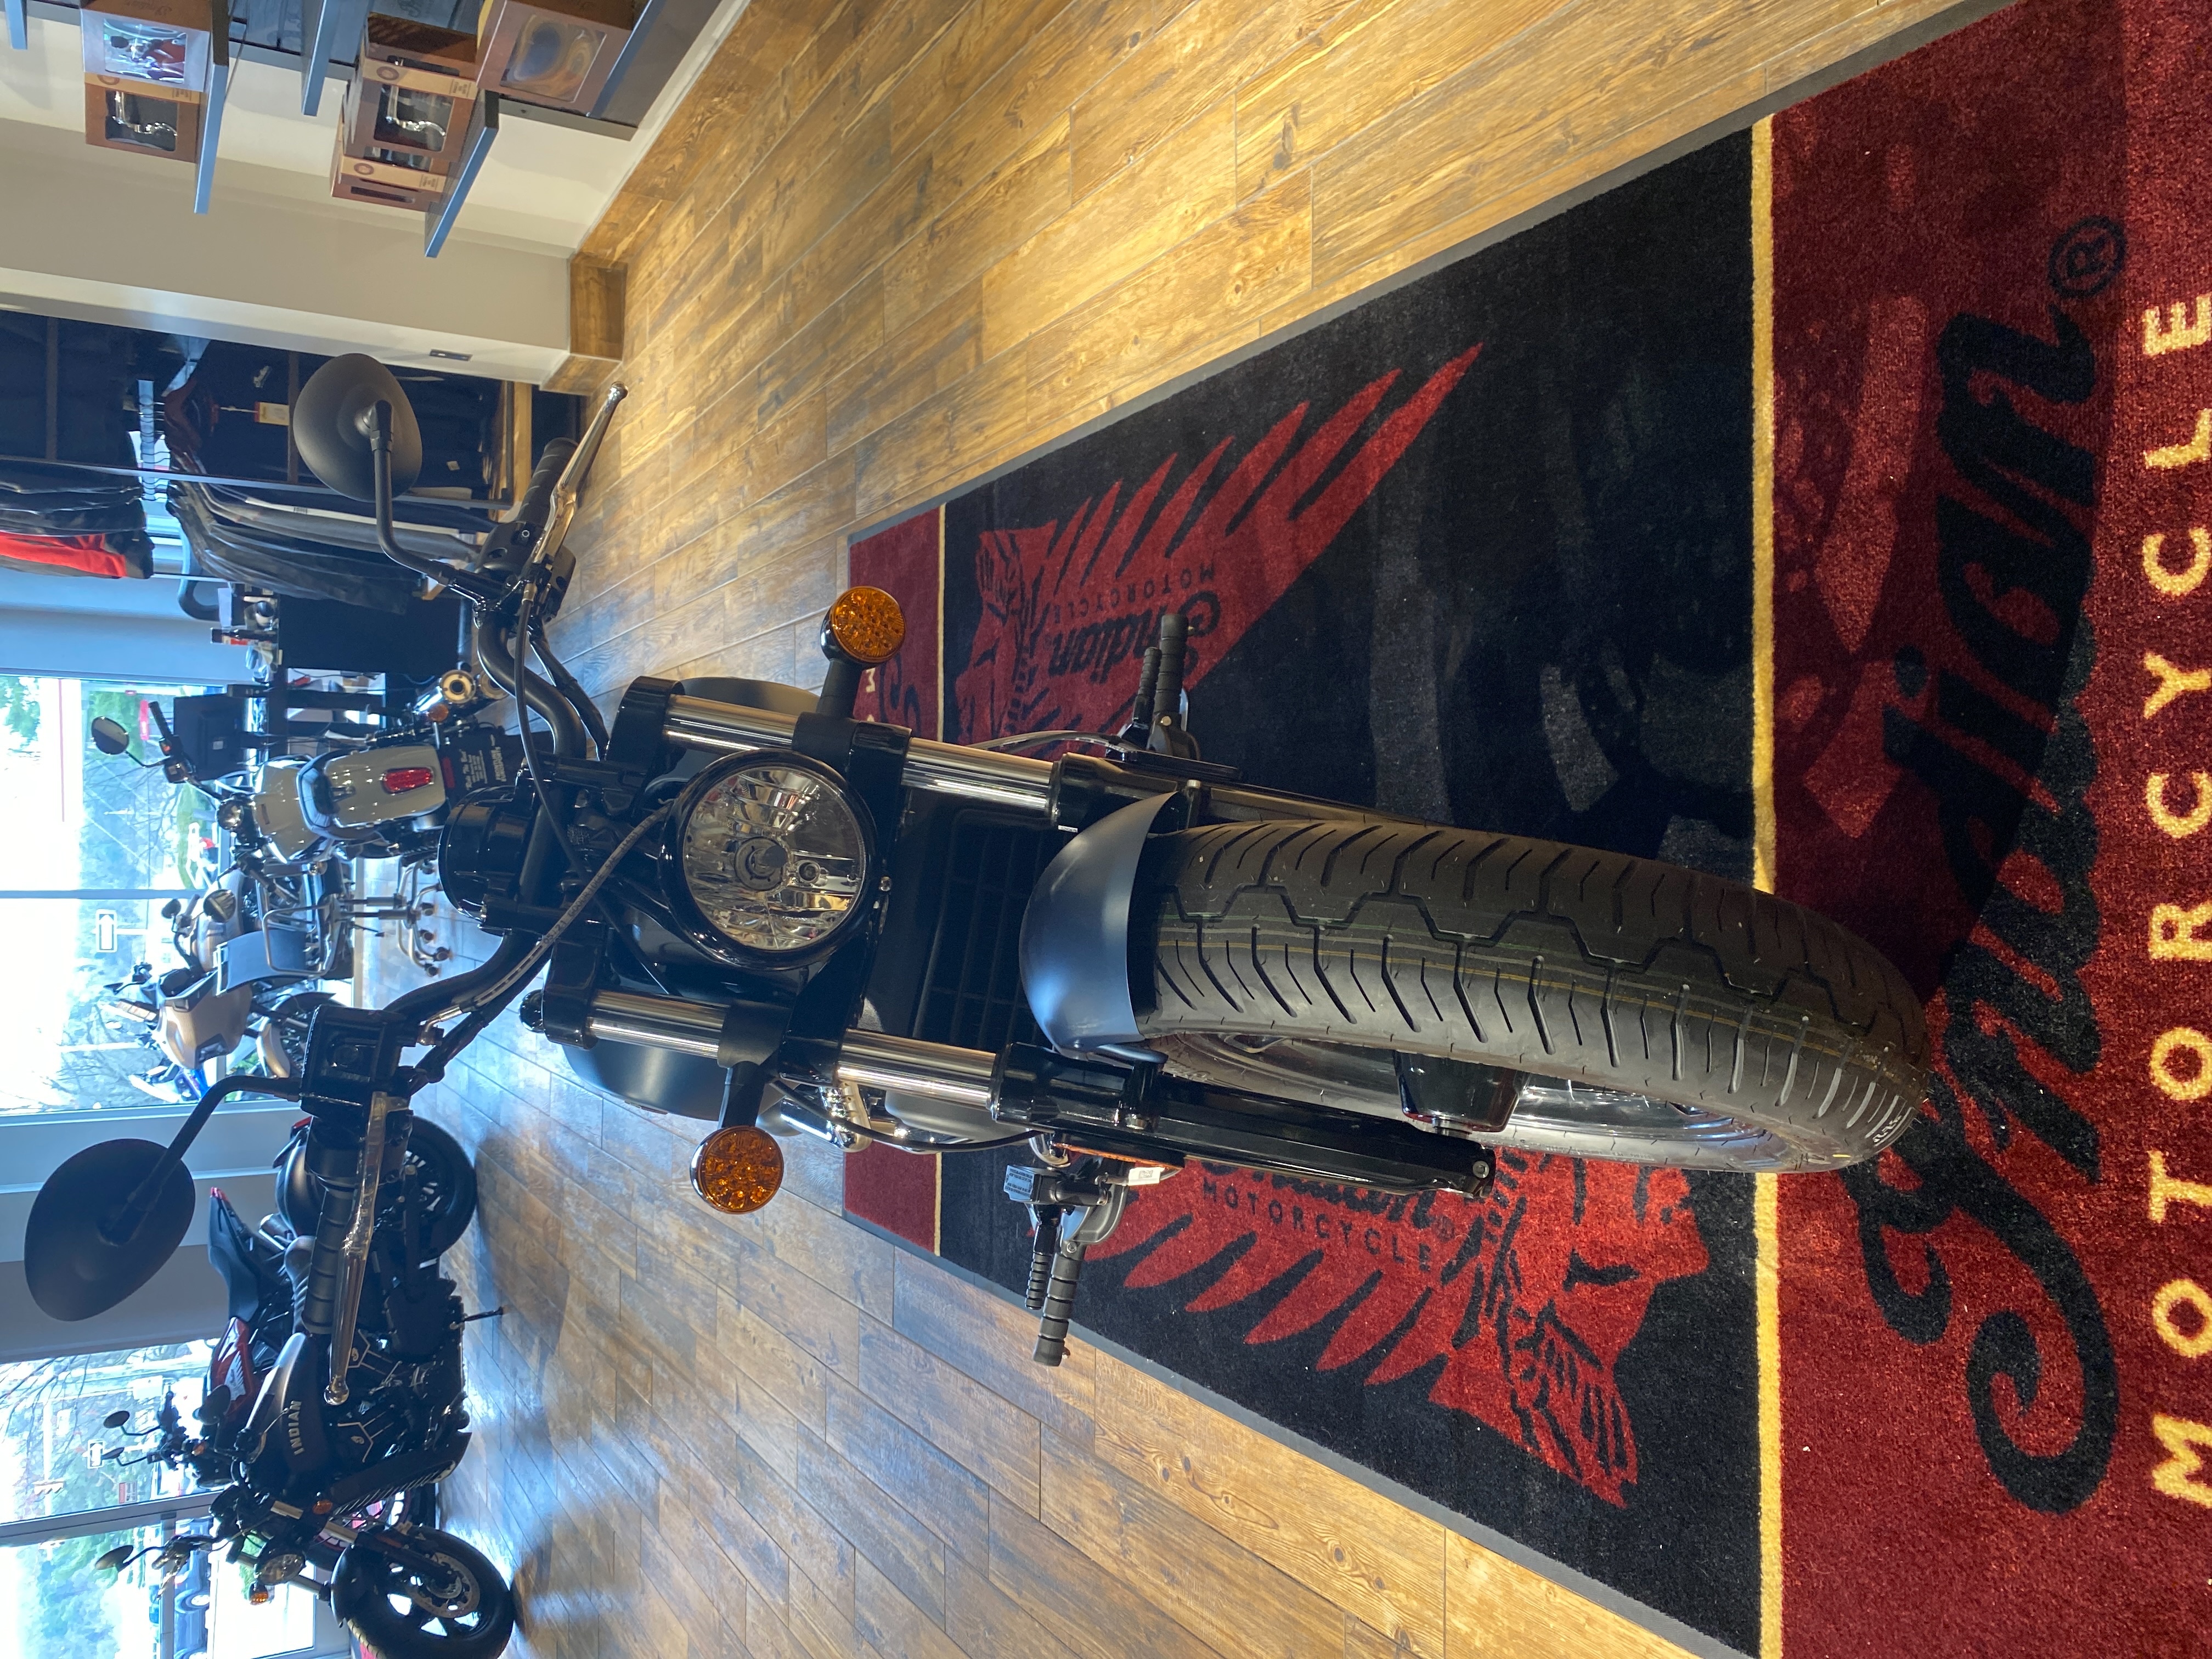 2021 Indian Scout Bobber Sixty at Frontline Eurosports